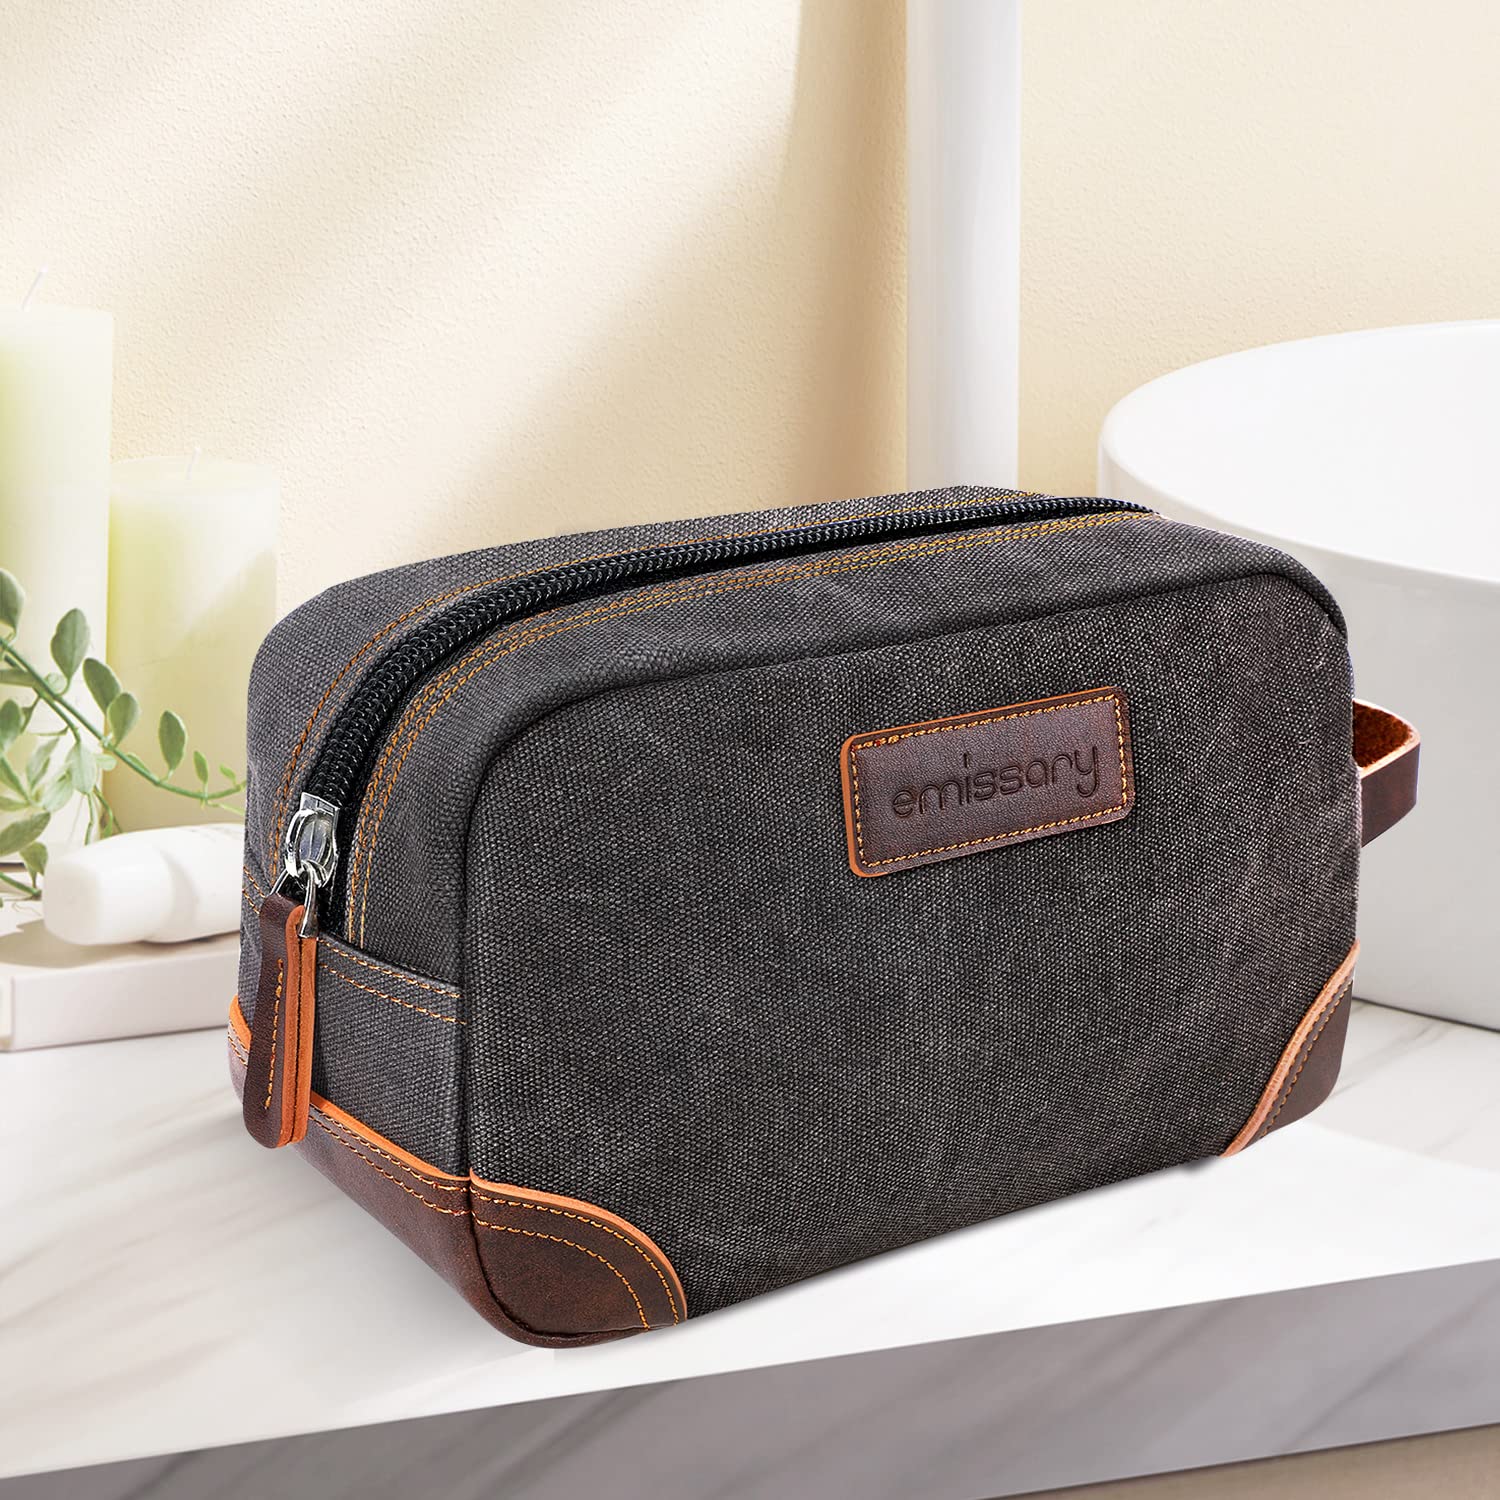 emissary Leather and Canvas Travel Toiletry Bag, Dopp Kit, Bathroom Men's Shaving Kit, Small Travel Accessories (Gray)